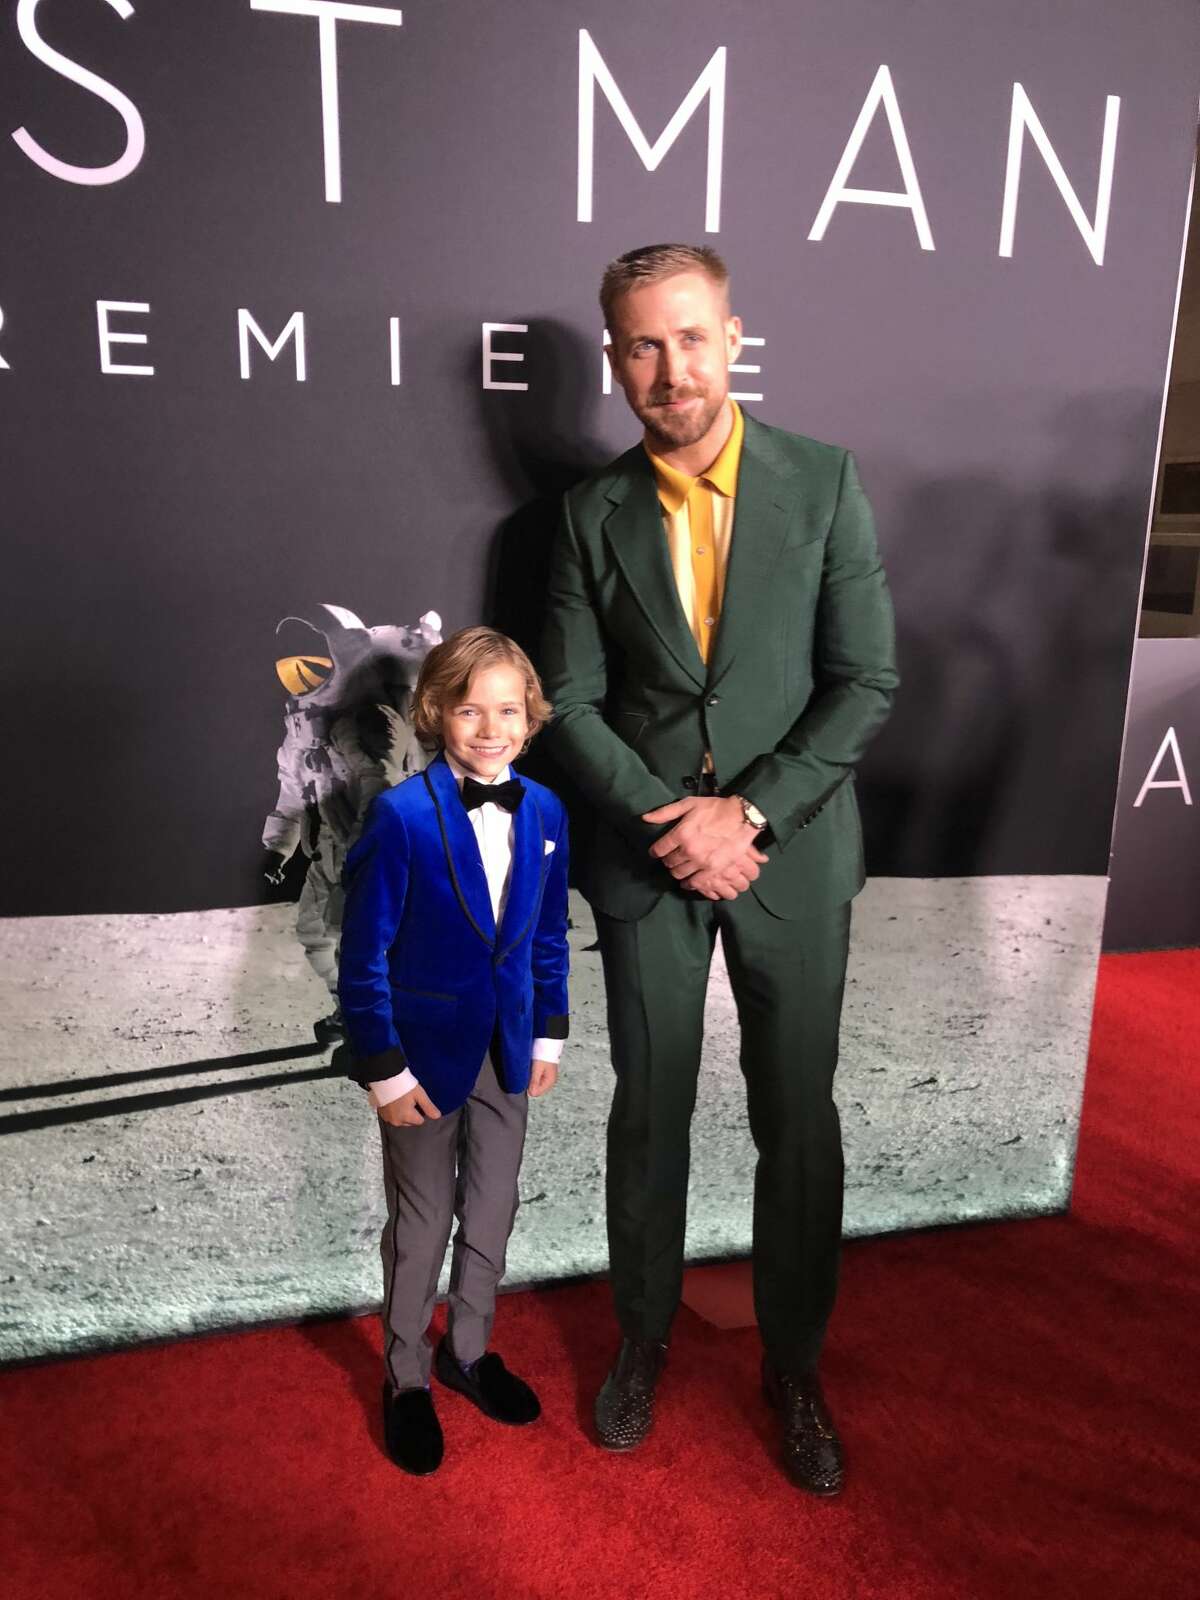 Houston native actor Gavin Warren poses with co-star Ryan Gosling for a private screening of "First Man."